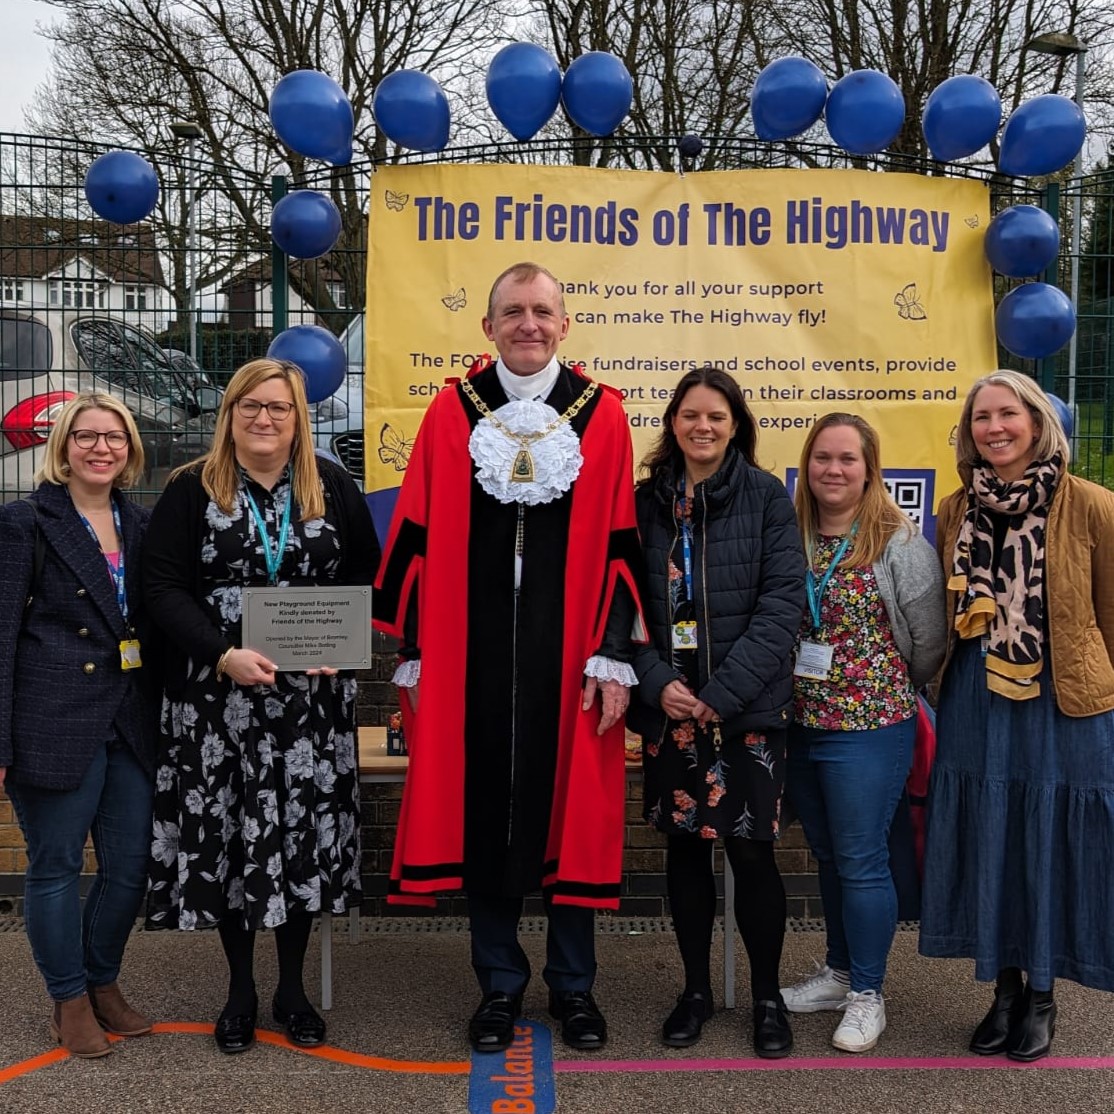 The Highway Primary School in #Chelsfield opened their new playground this week, which the Mayor had the pleasure of opening. The creation of the playground was due to huge fundraising efforts by Friends of The Highway, parents & local residents. #ProudOfBromley